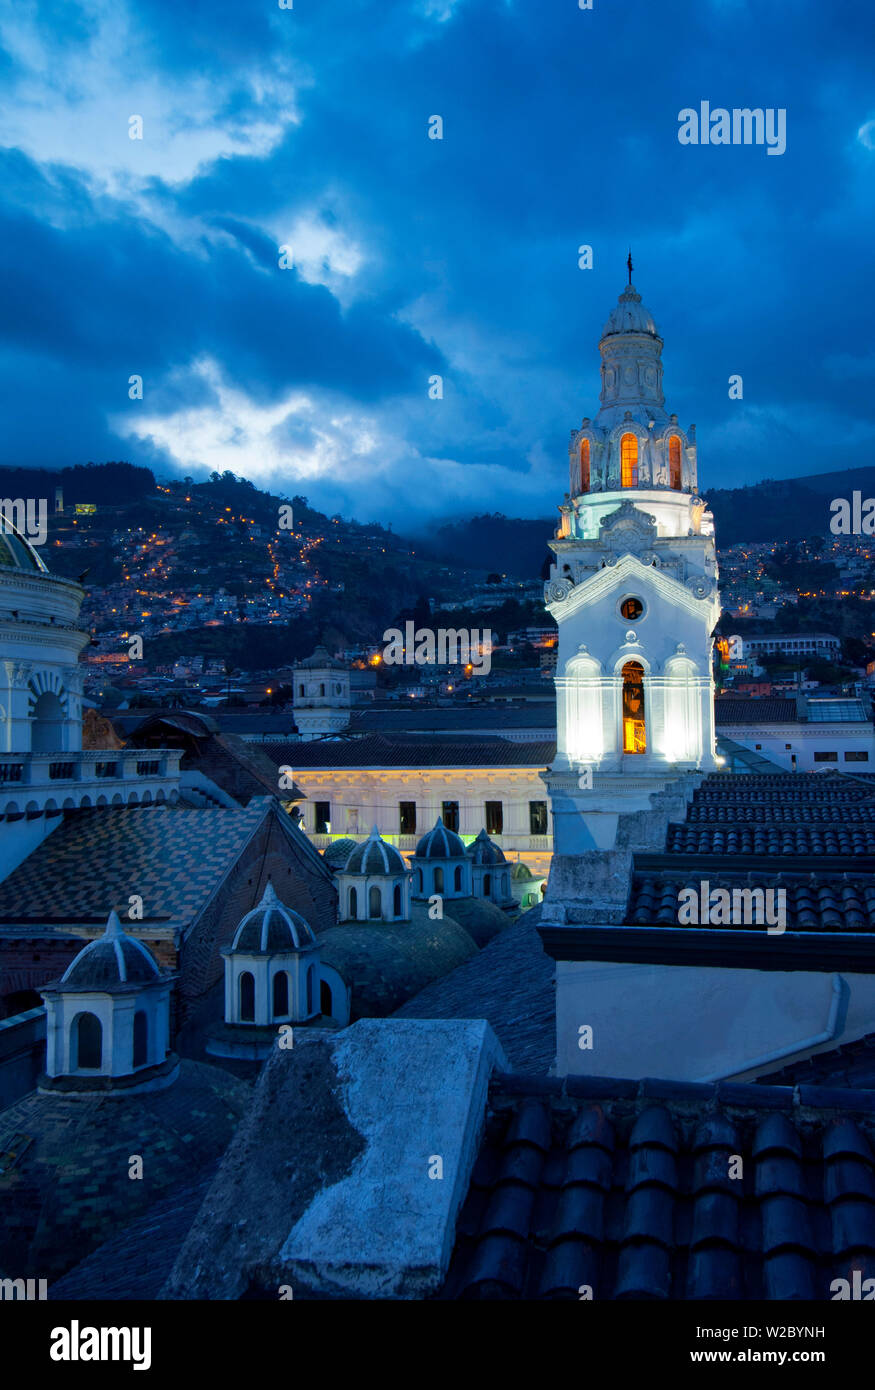 Metropolitan Cathedral of Quito, La Catedral, Belltower, Old Town, Historical Center, UNESCO World Cultural Heritage Site, Cathedral of Ecuador, Quito, Ecuador Stock Photo